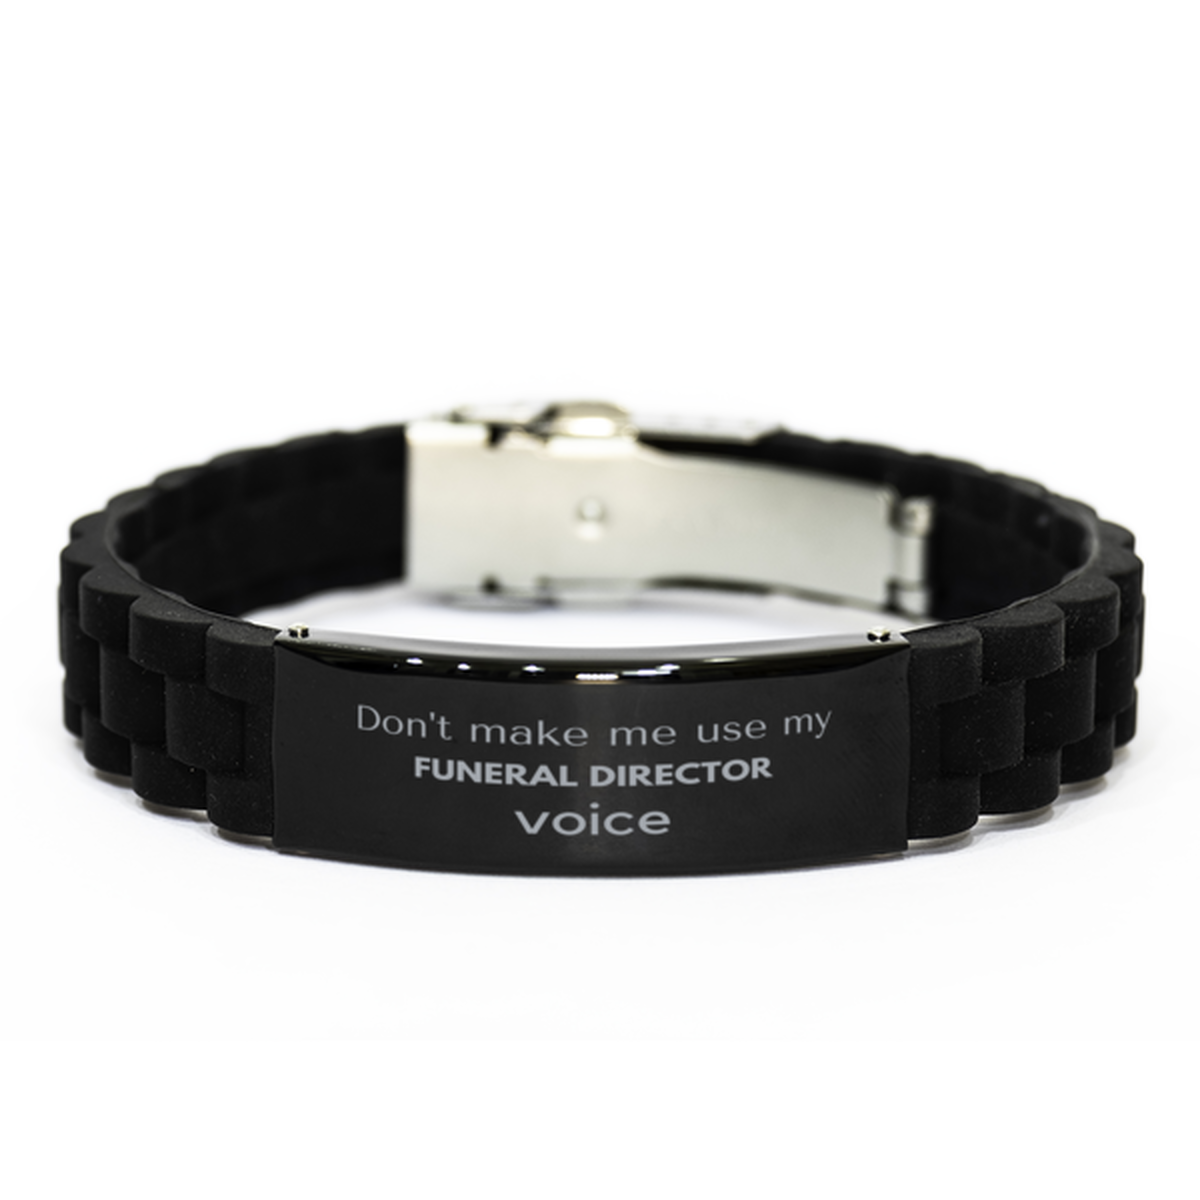 Don't make me use my Funeral Director voice, Sarcasm Funeral Director Gifts, Christmas Funeral Director Black Glidelock Clasp Bracelet Birthday Unique Gifts For Funeral Director Coworkers, Men, Women, Colleague, Friends